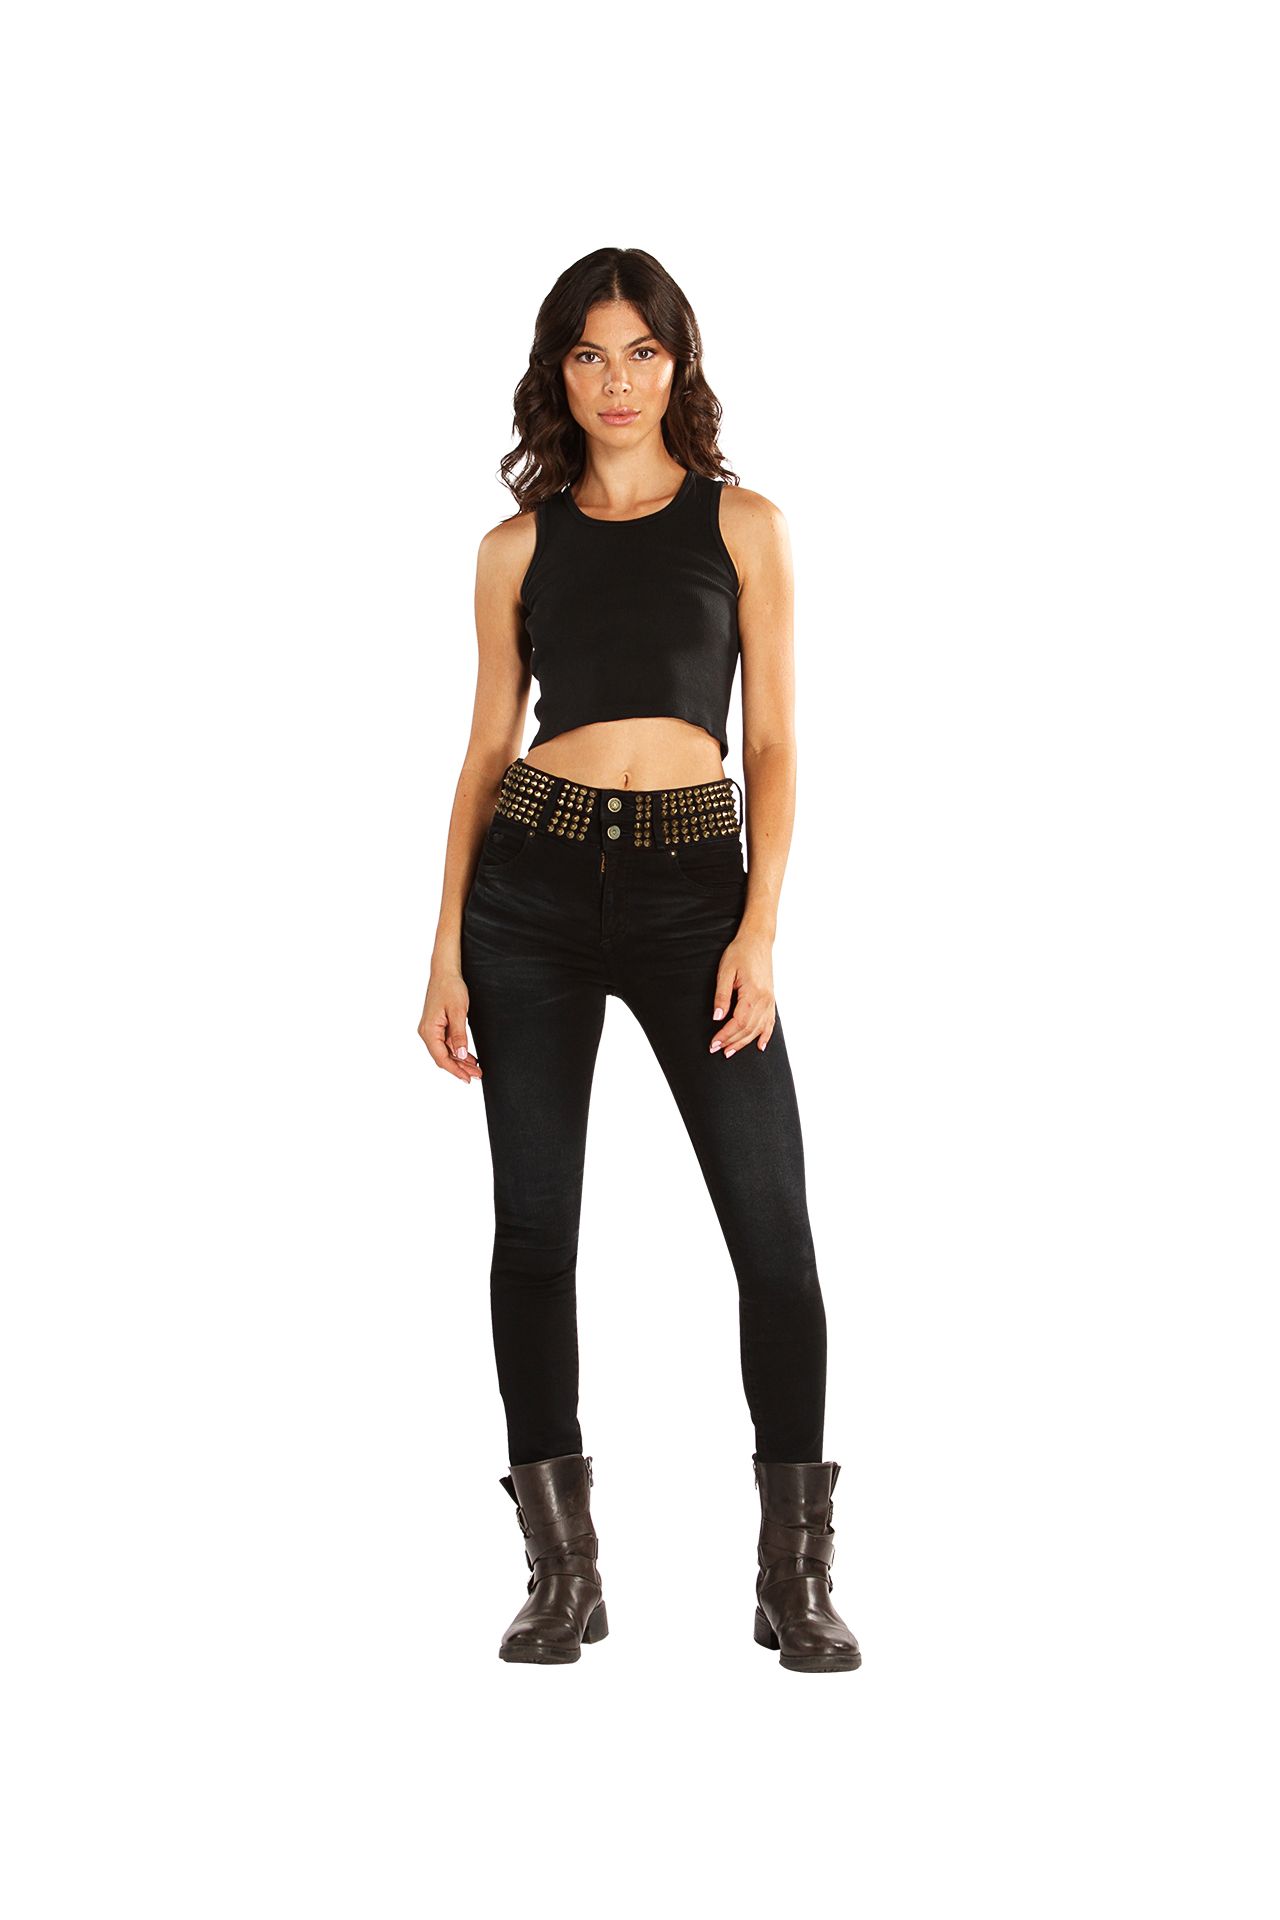 ROBIN'S DOUBLE WAIST SKINNY WITH SPIKES IN F-UP BLACK